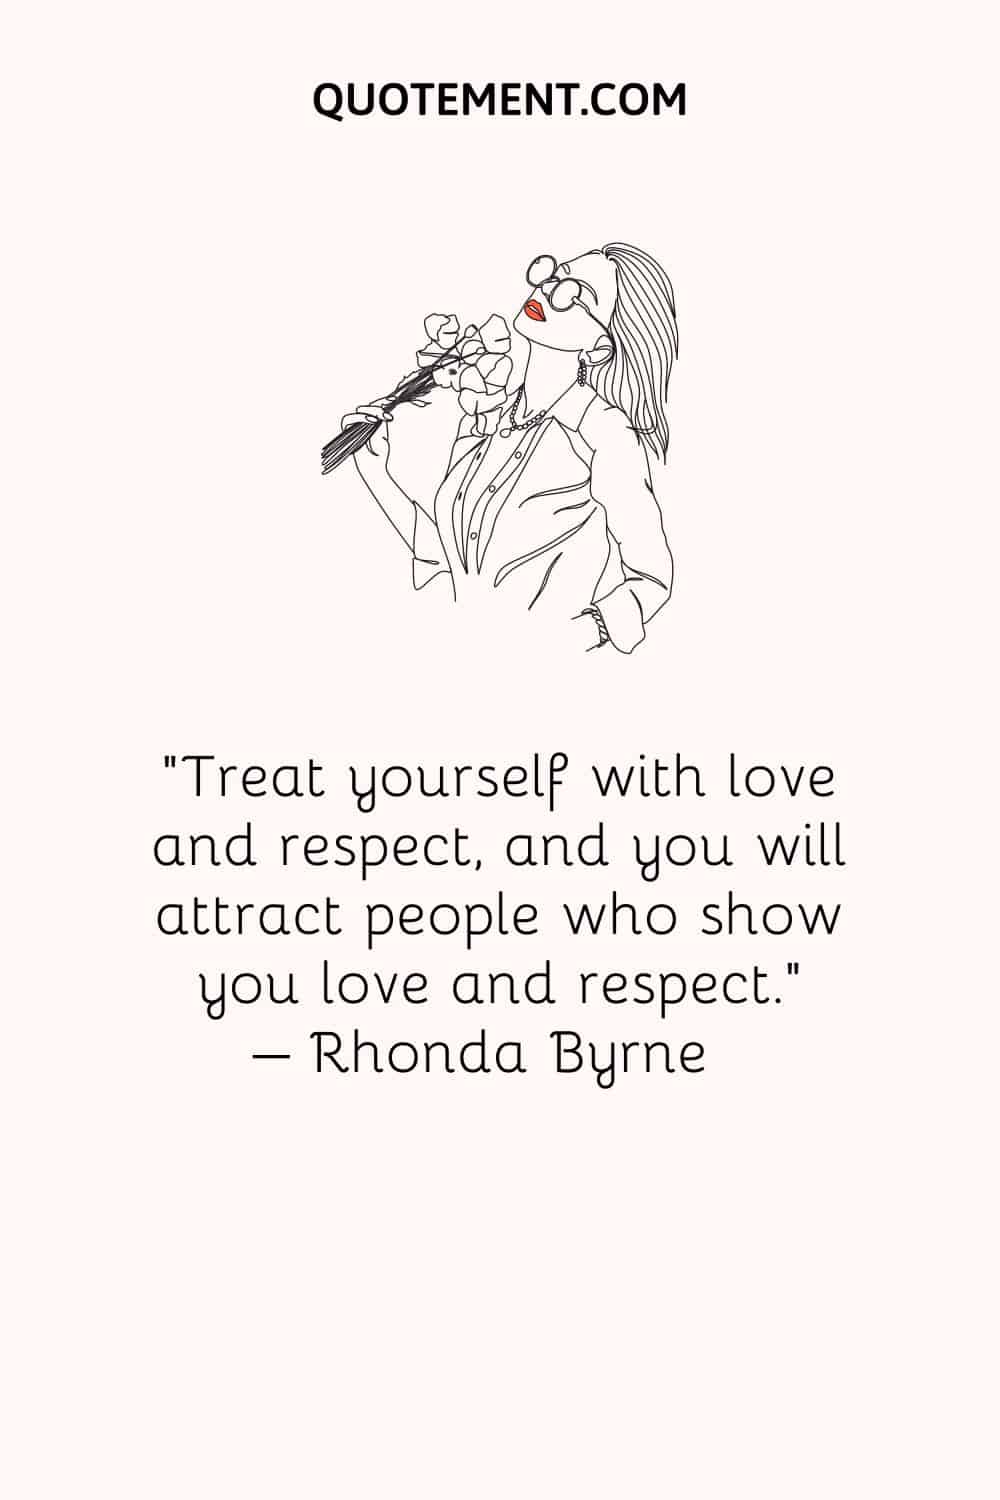 Treat yourself with love and respect, and you will attract people who show you love and respect